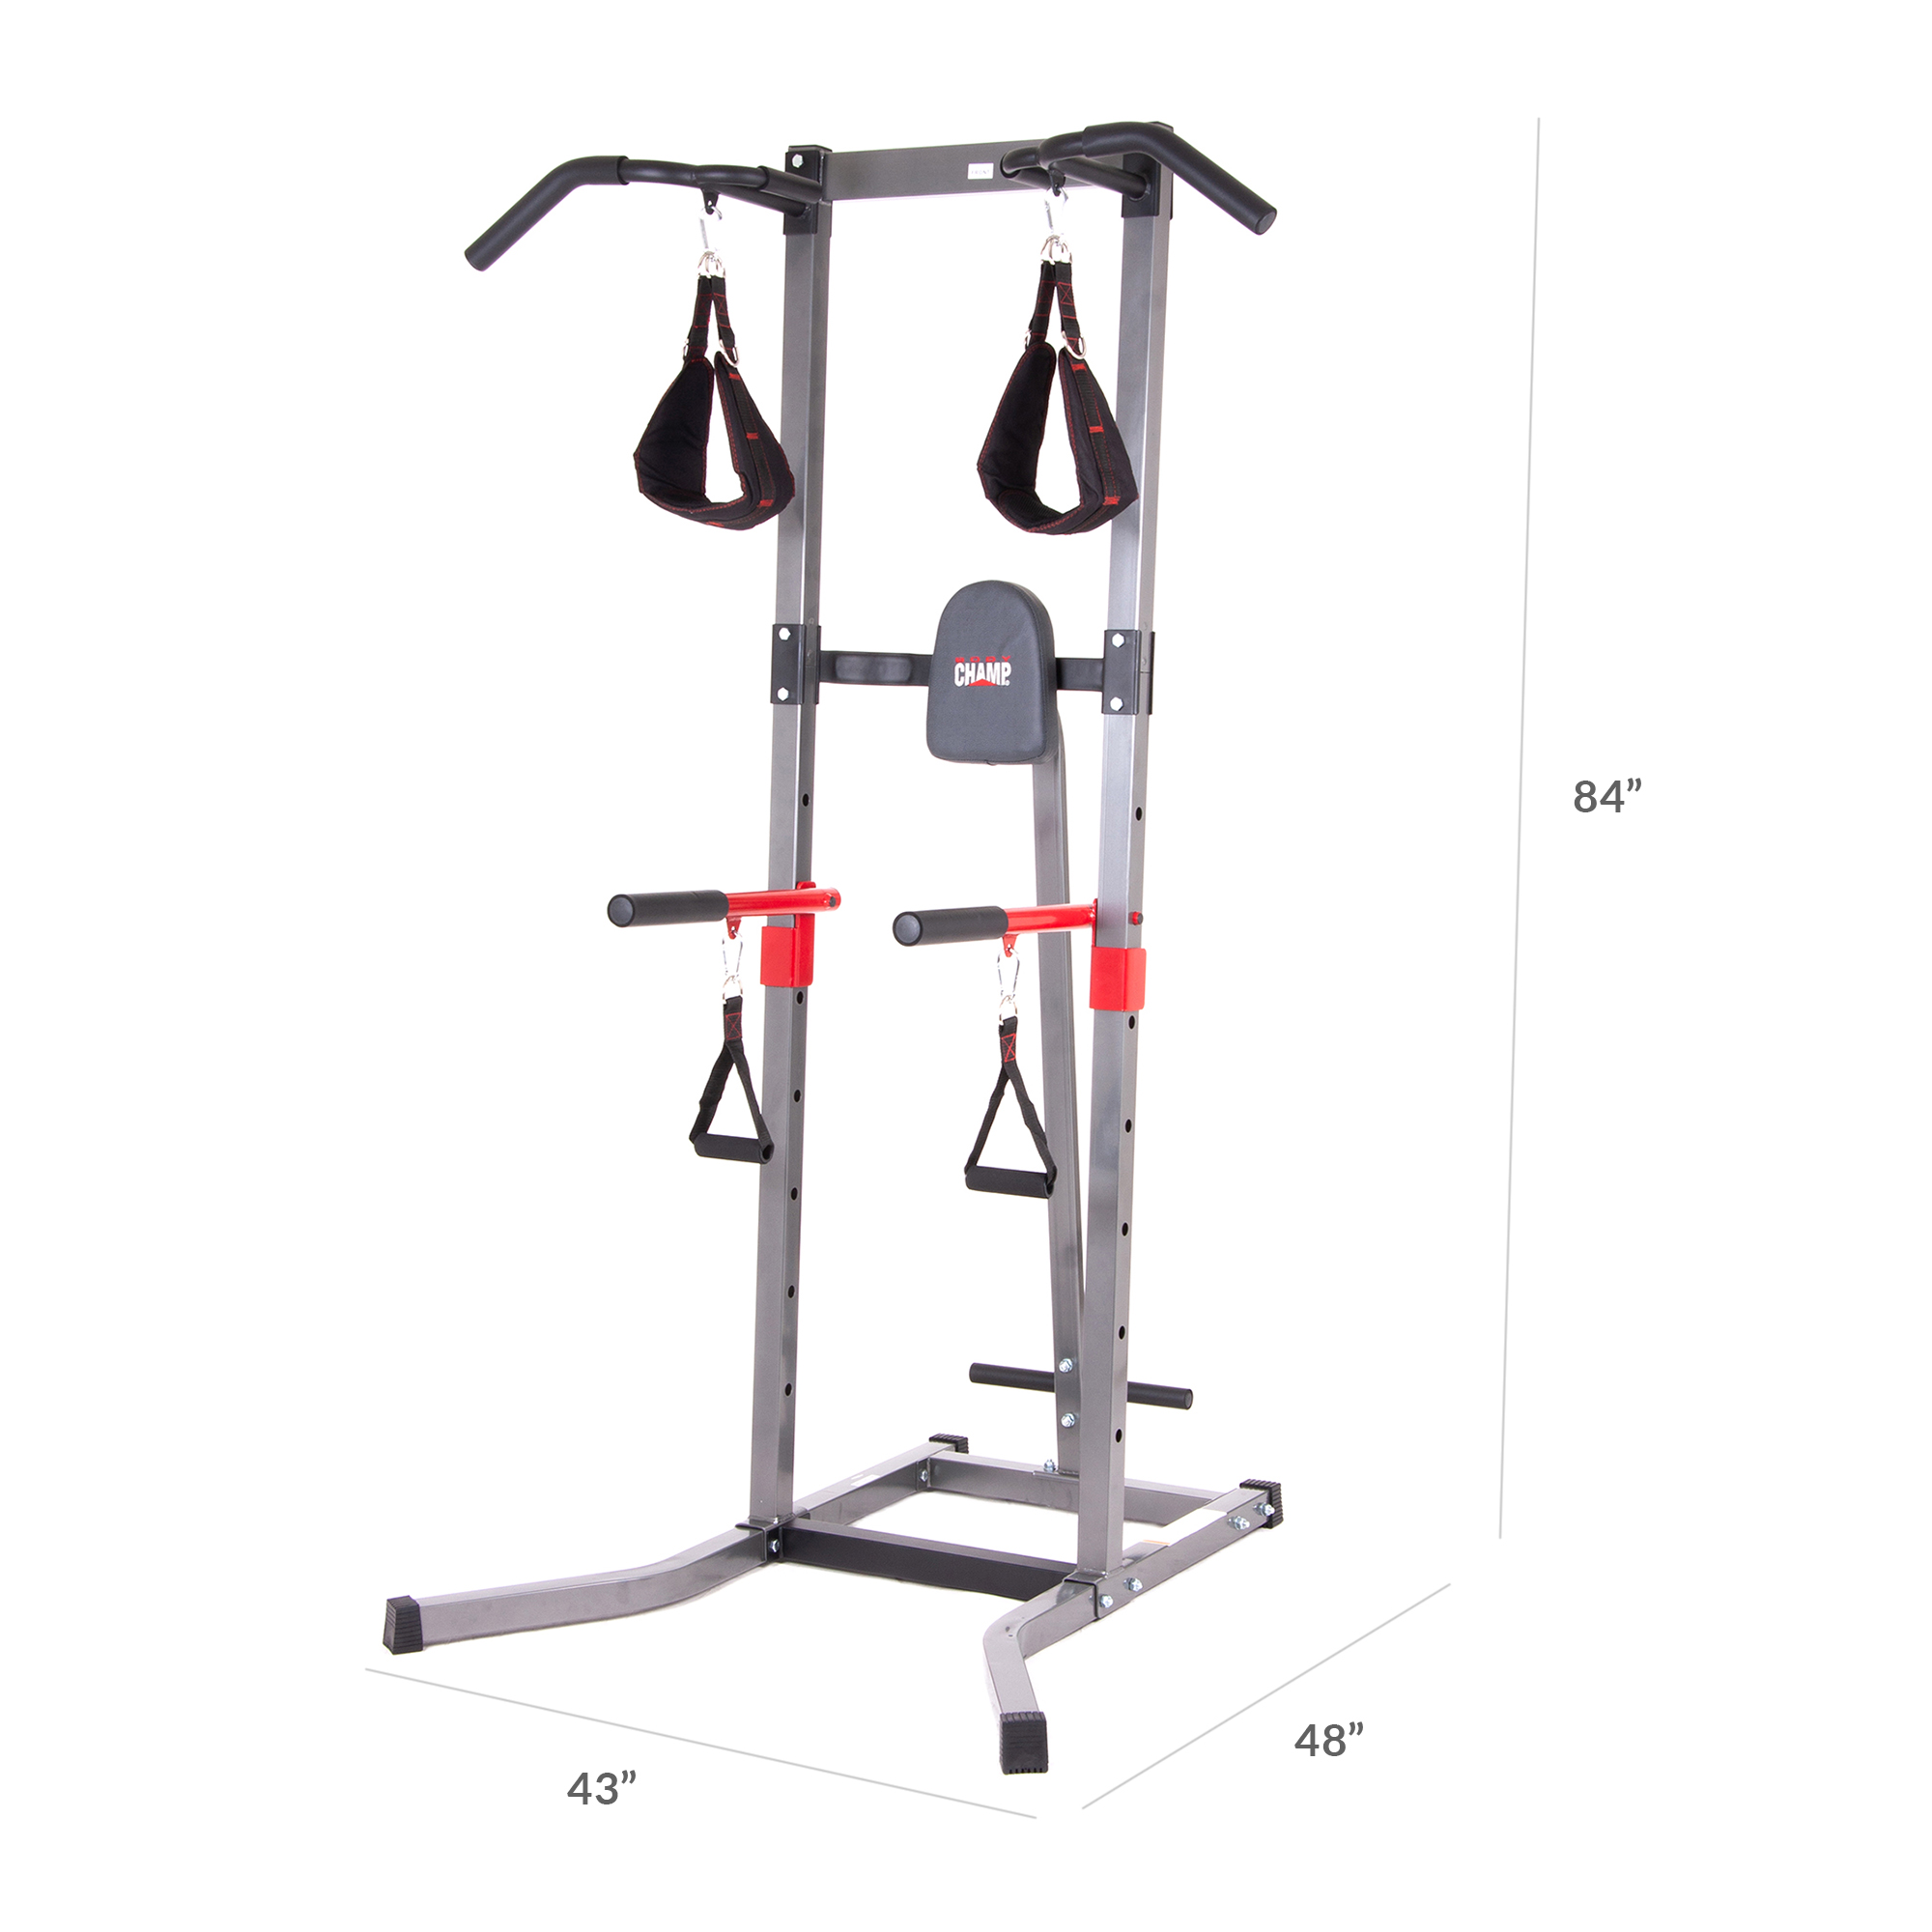 Body Champ VKR2078 5-in-1 Power Tower and Dip Station, Home Gym Equipment - image 5 of 9